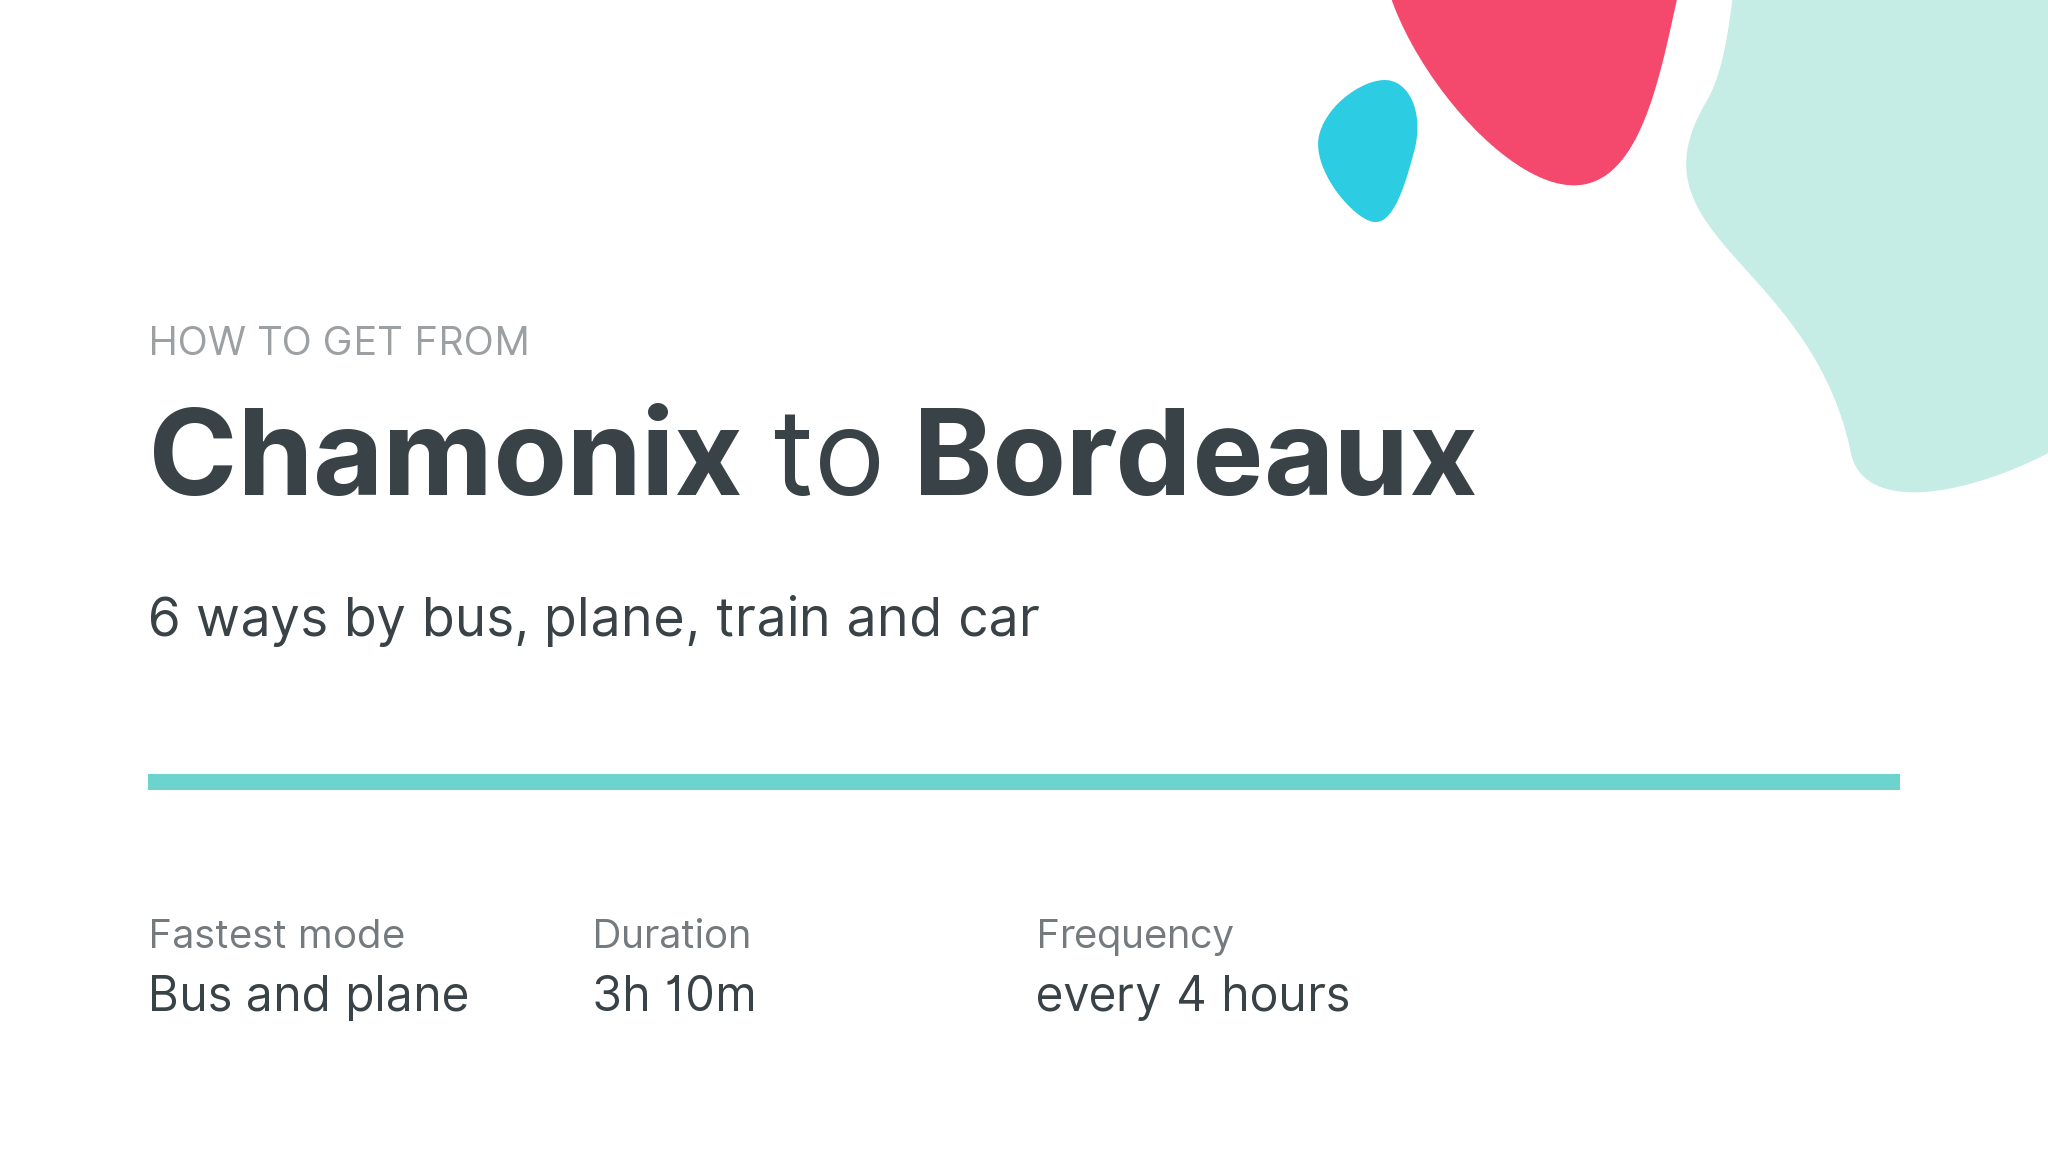 How do I get from Chamonix to Bordeaux